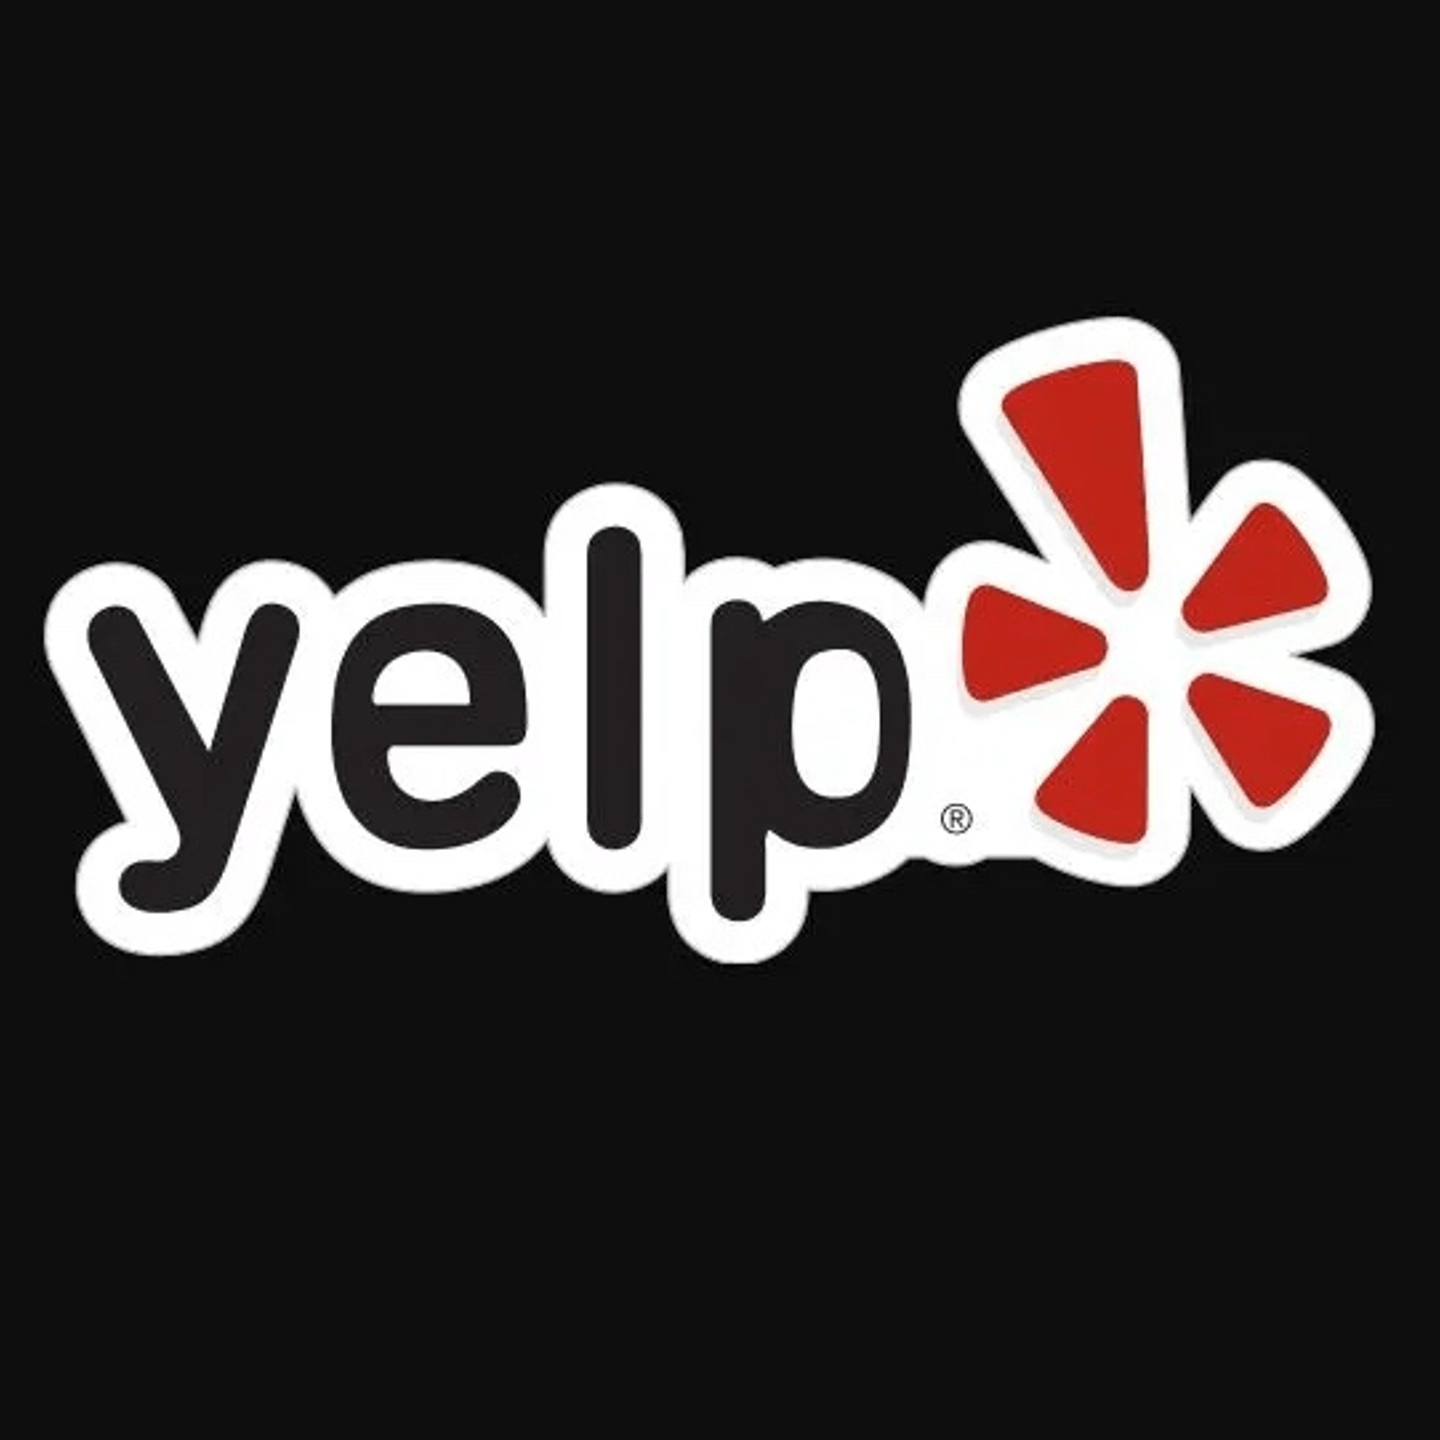 Reservations on Yelp